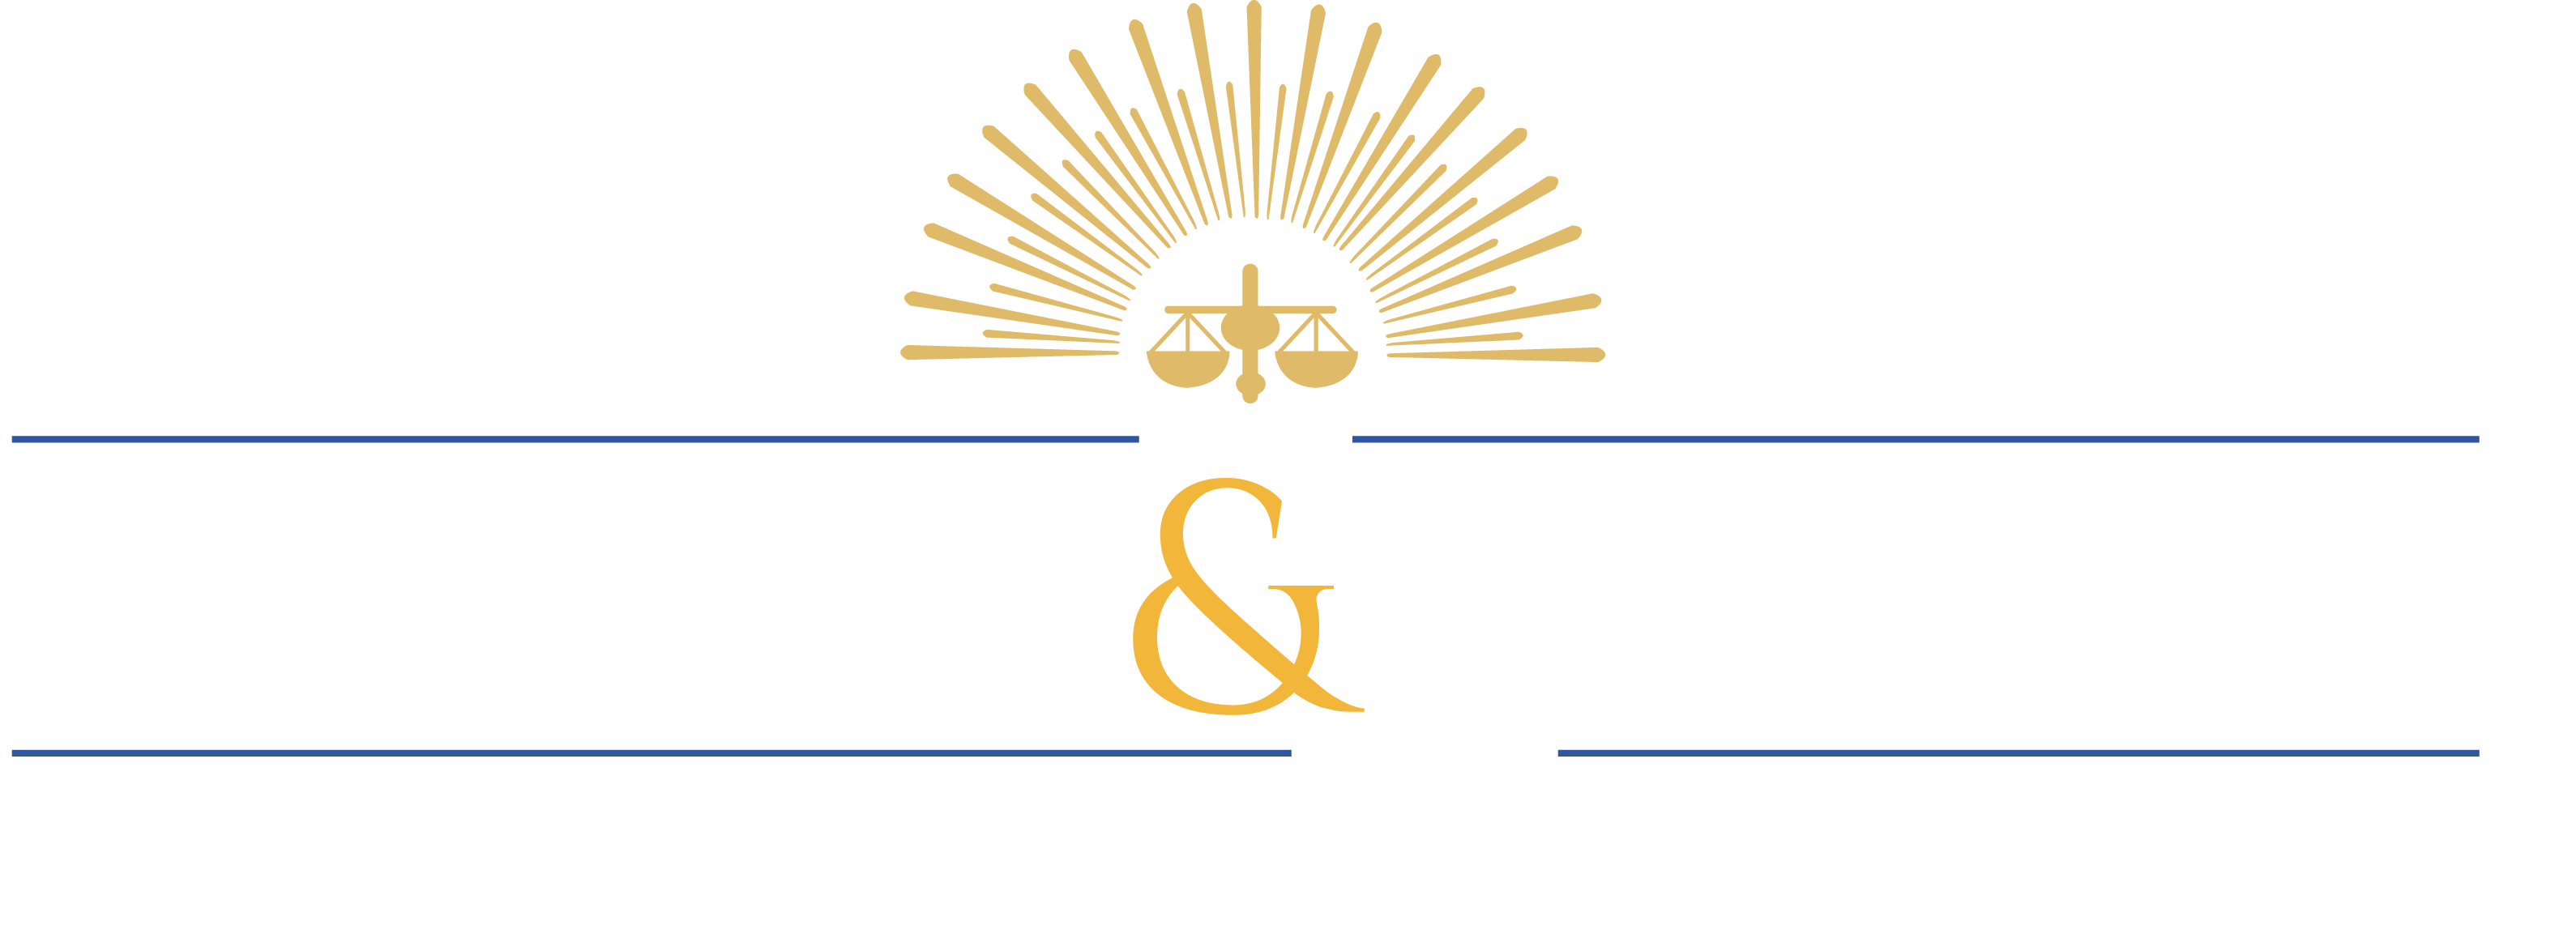 Cooper and Cooper Law Offices, PLLC